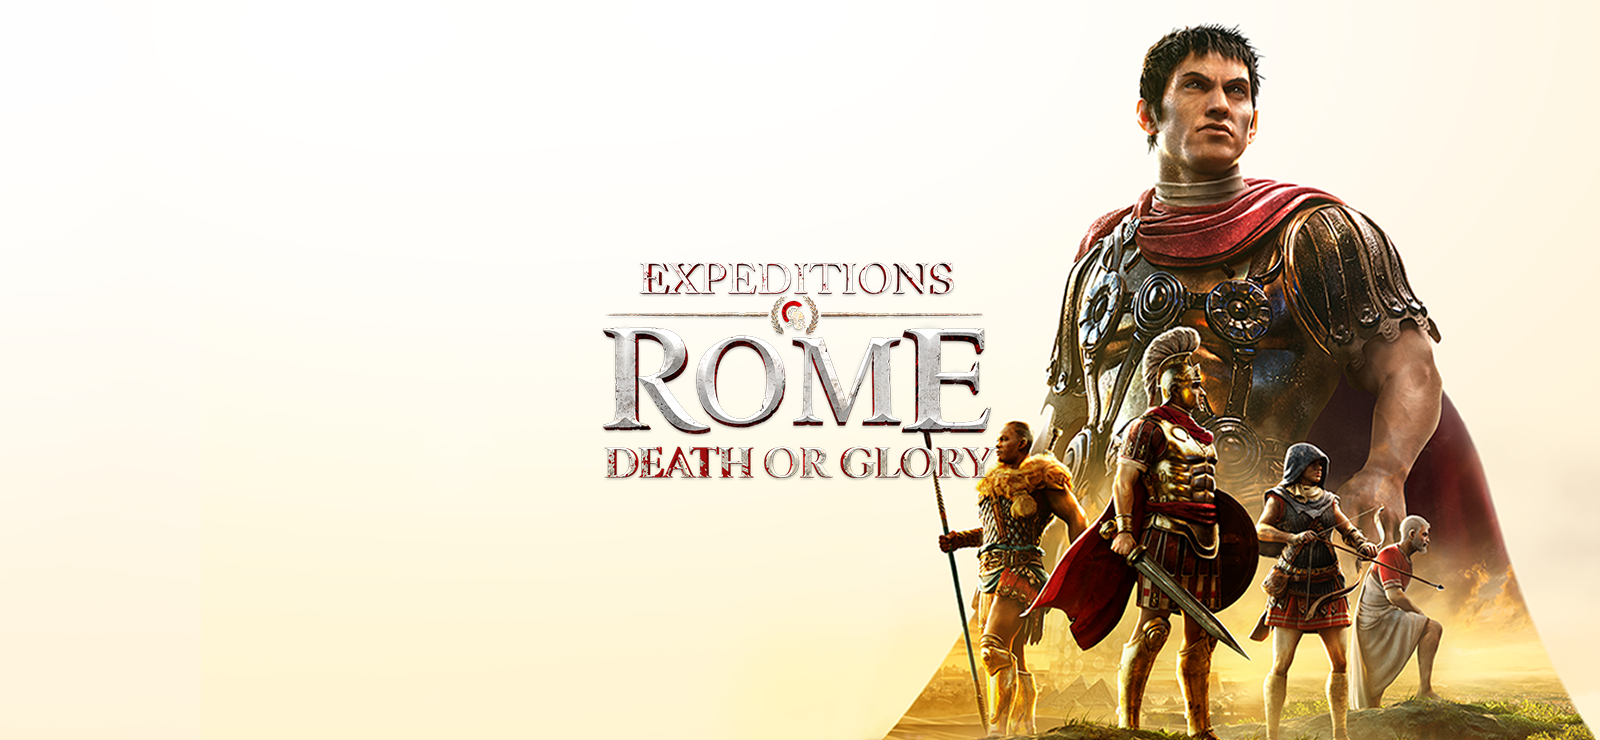 Expeditions: Rome - Death Or Glory